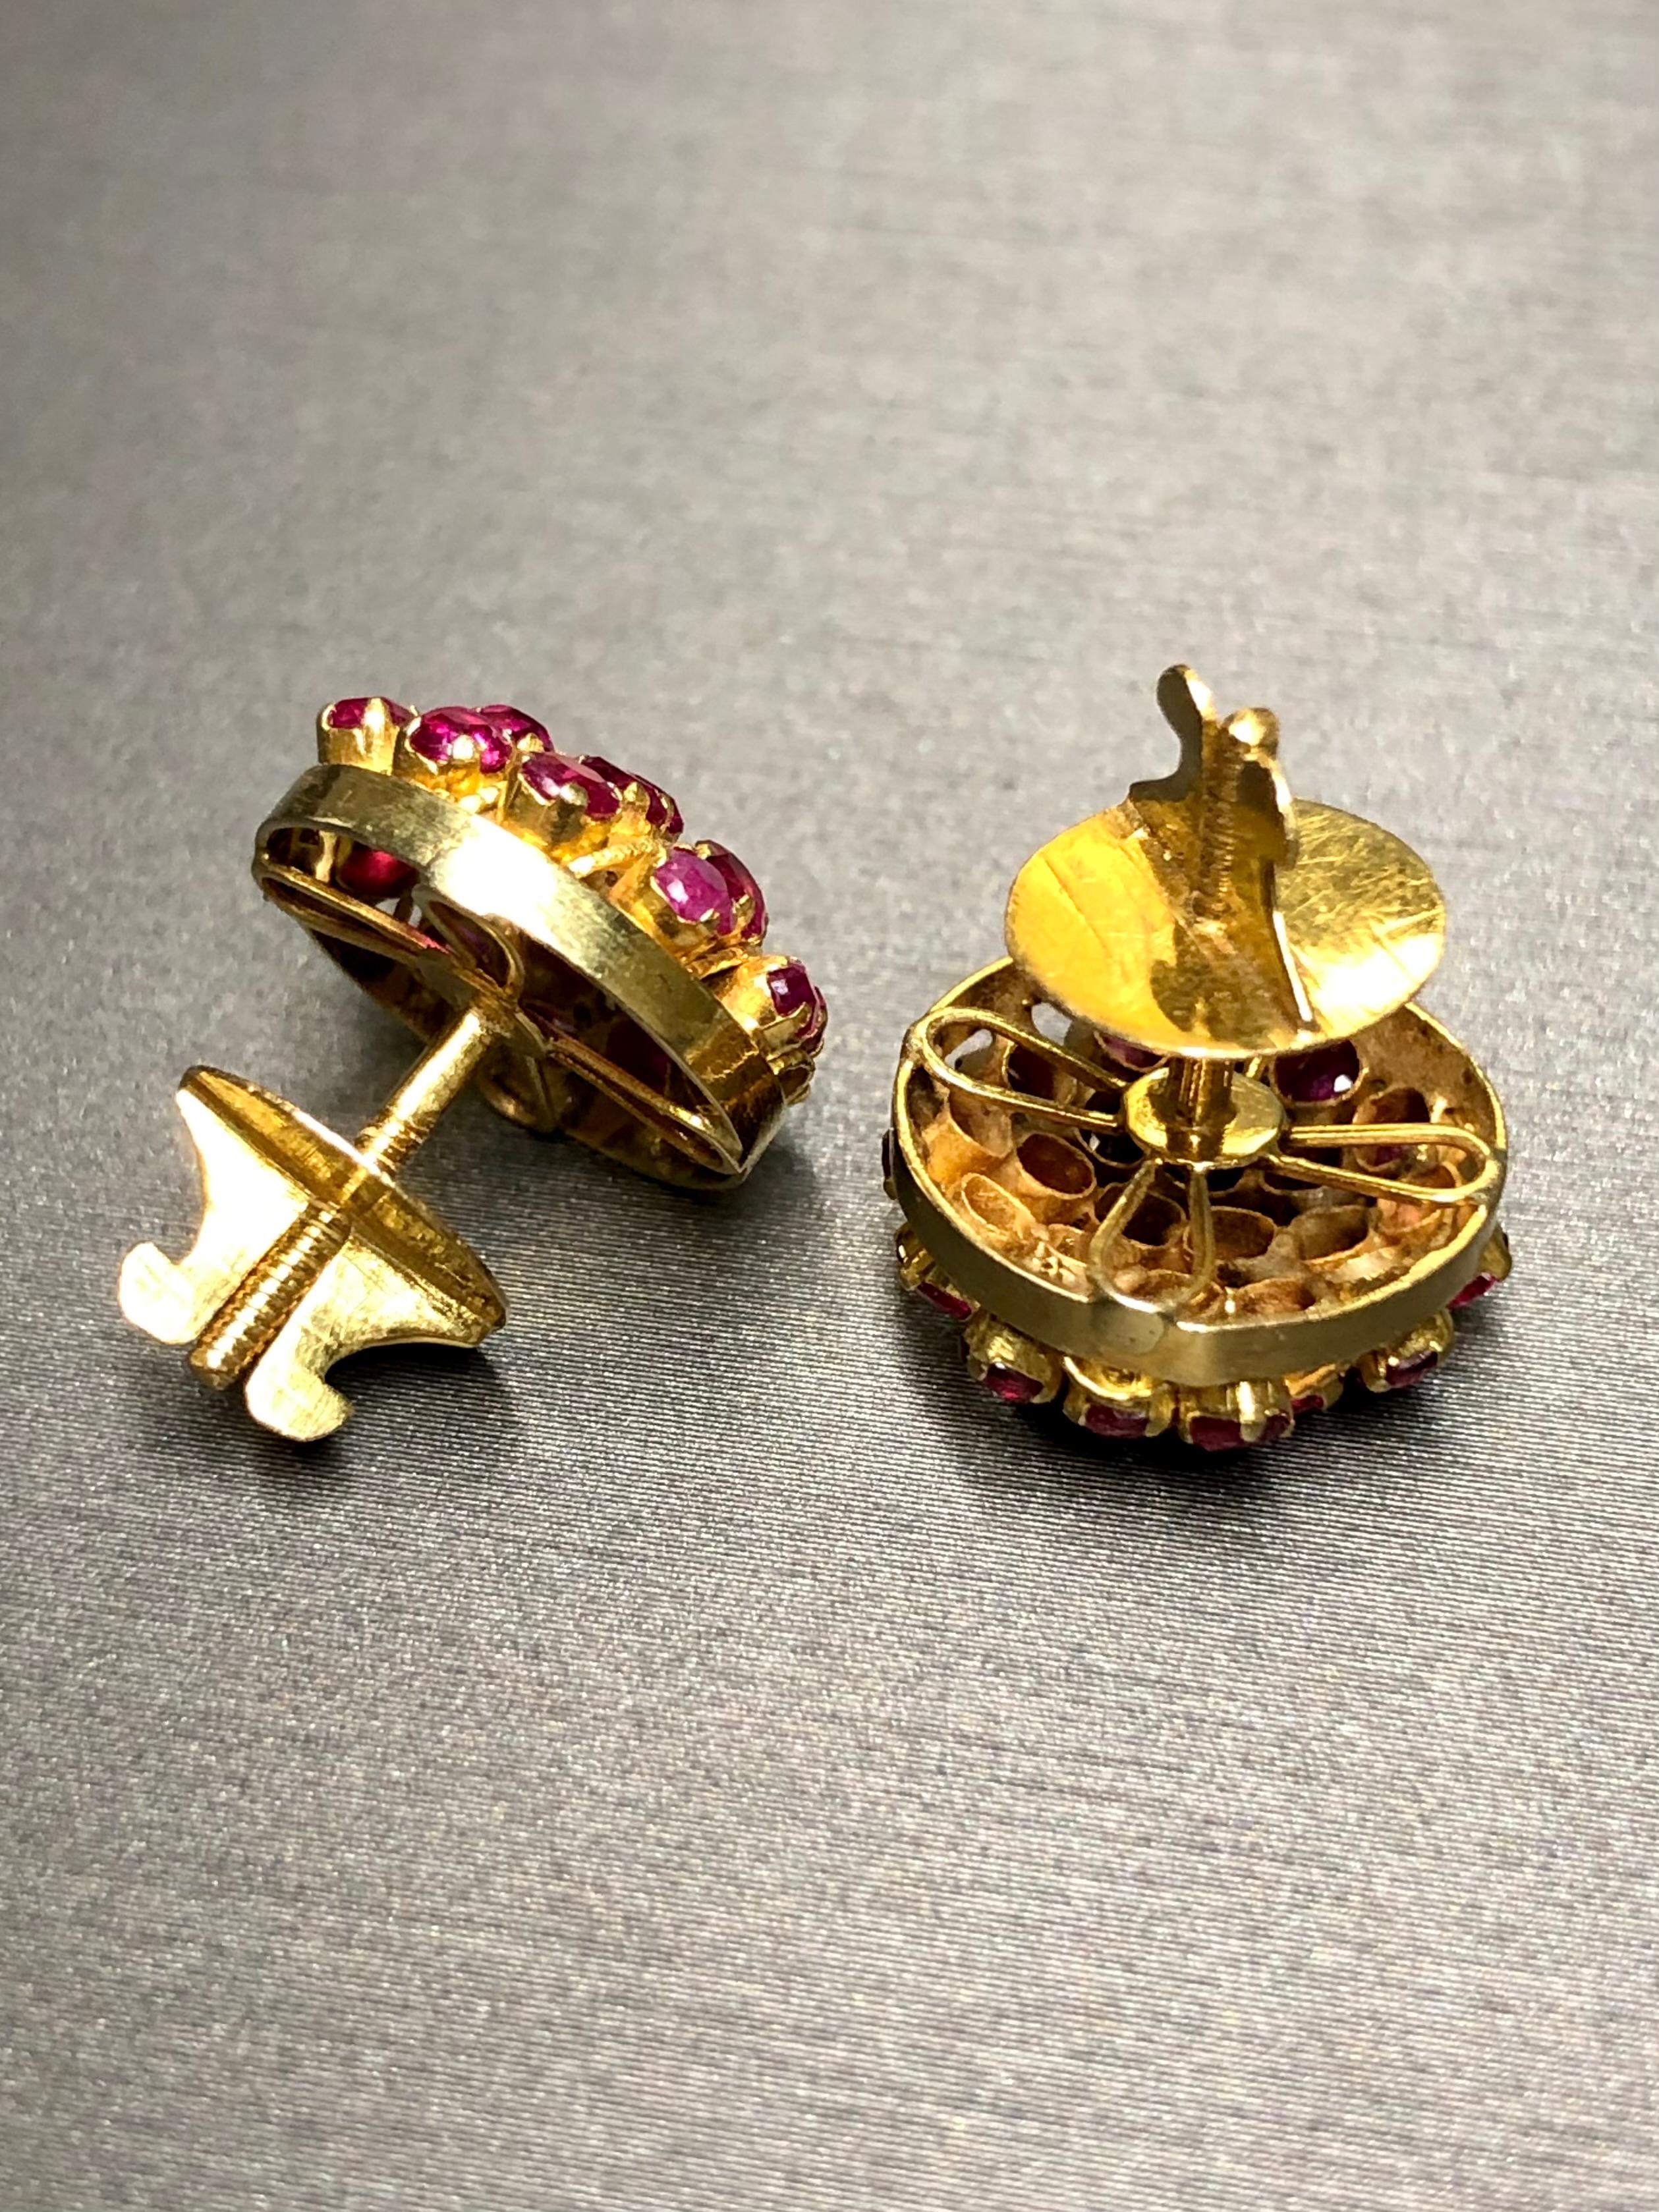 Estate 24K Round Cluster Ruby Stud Screwback Earrings 4cttw In Good Condition For Sale In Winter Springs, FL